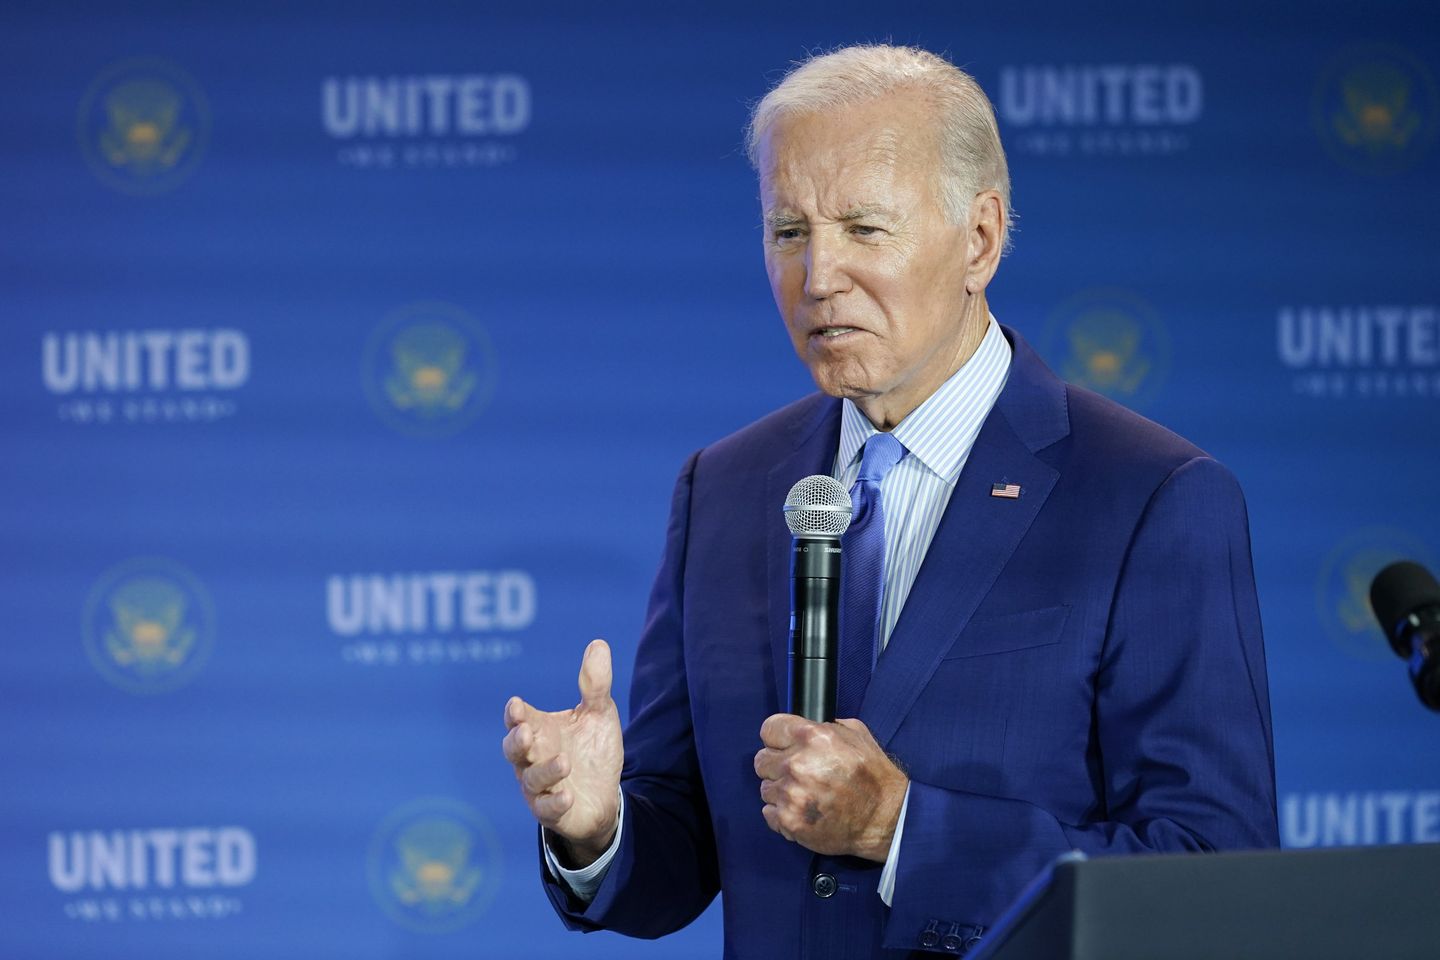 Biden in '60 Minutes' interview says U.S. offices will defend Taiwan if China invades